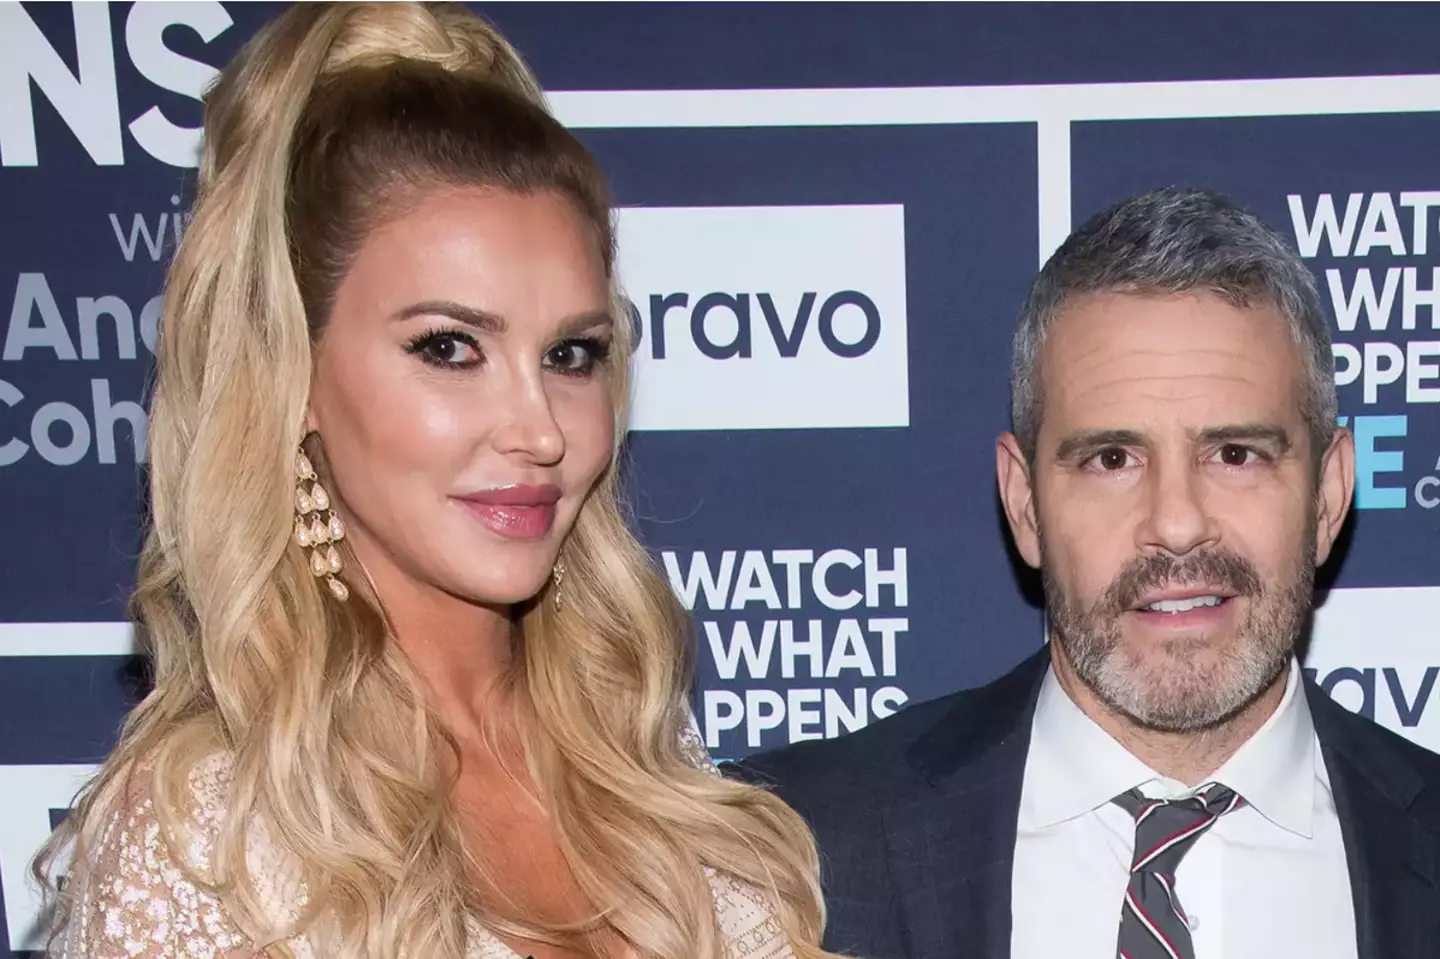 Andy Cohen has responded to Brandi Glanville's allegation.